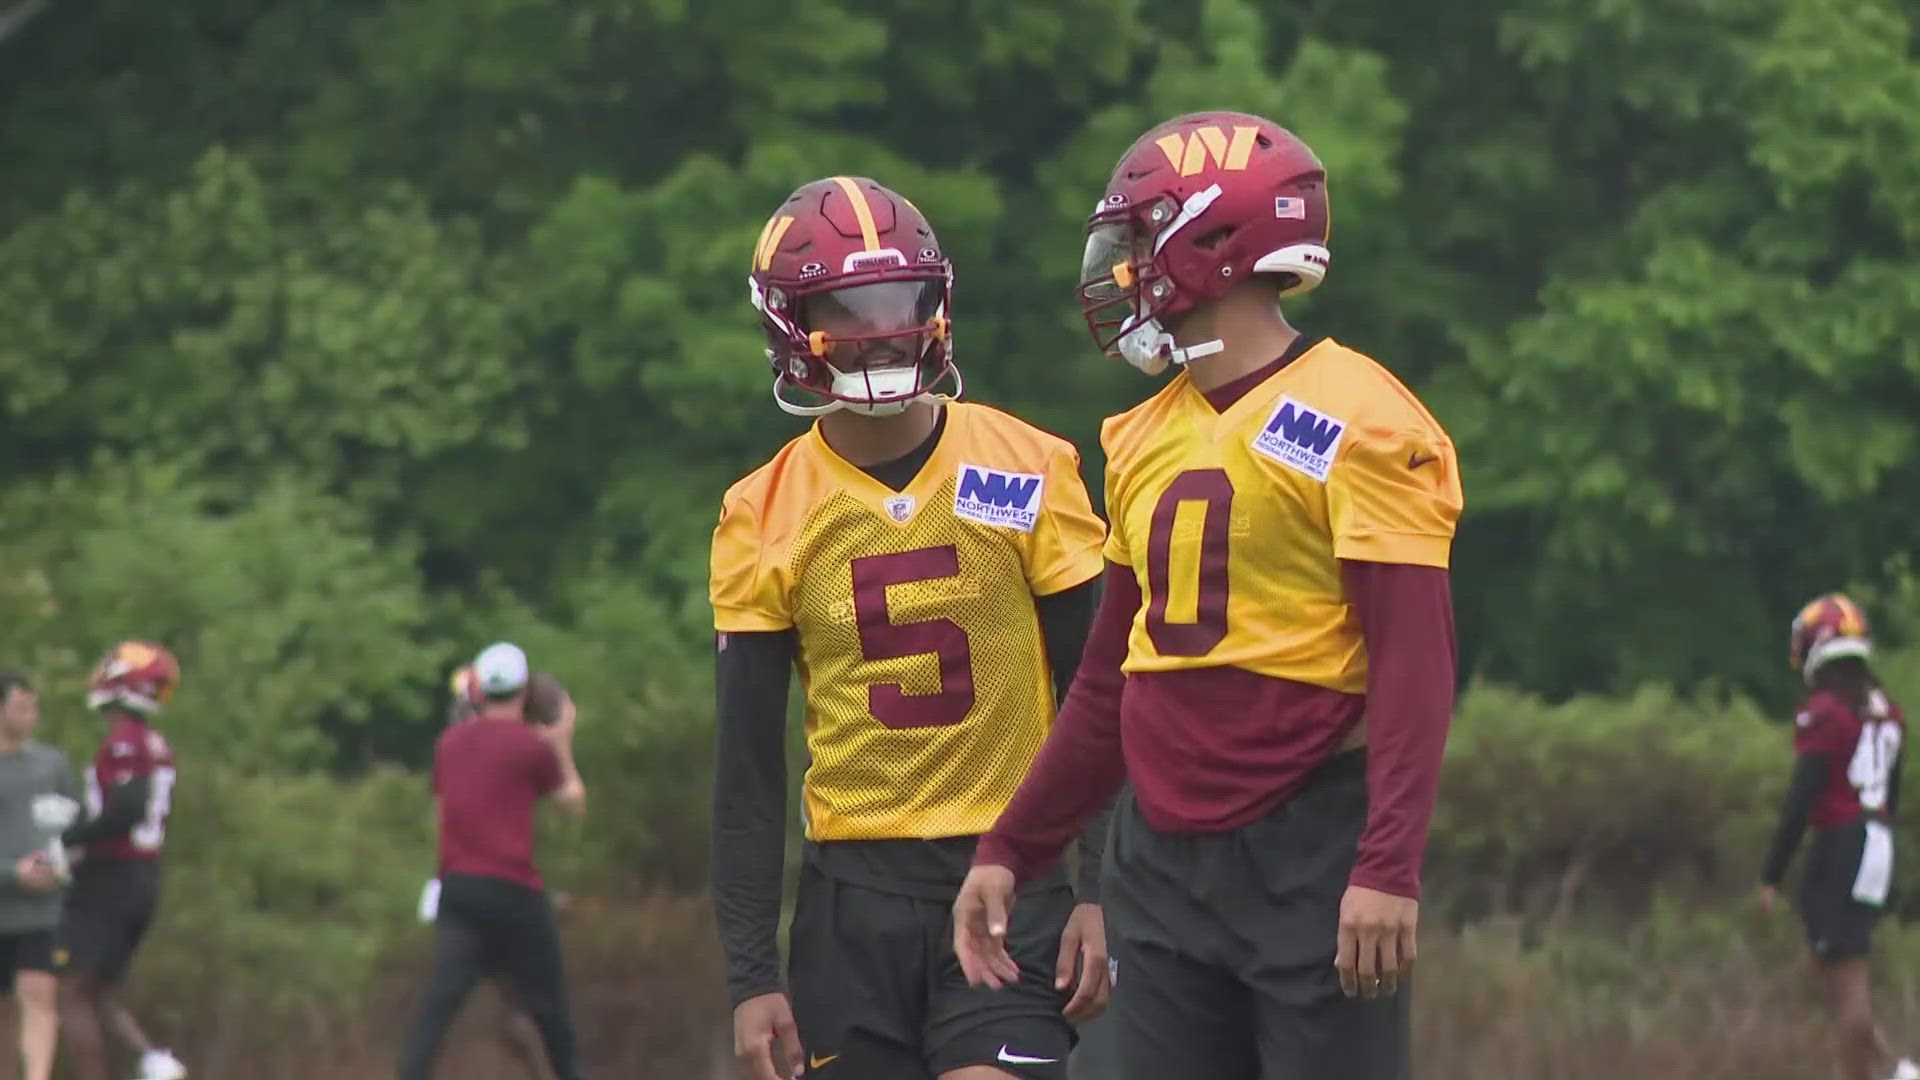 Organized team activities, or OTAs, kicked off Tuesday for the Washington Commanders. The buzz is still loud around quarterback Jayden Daniels.